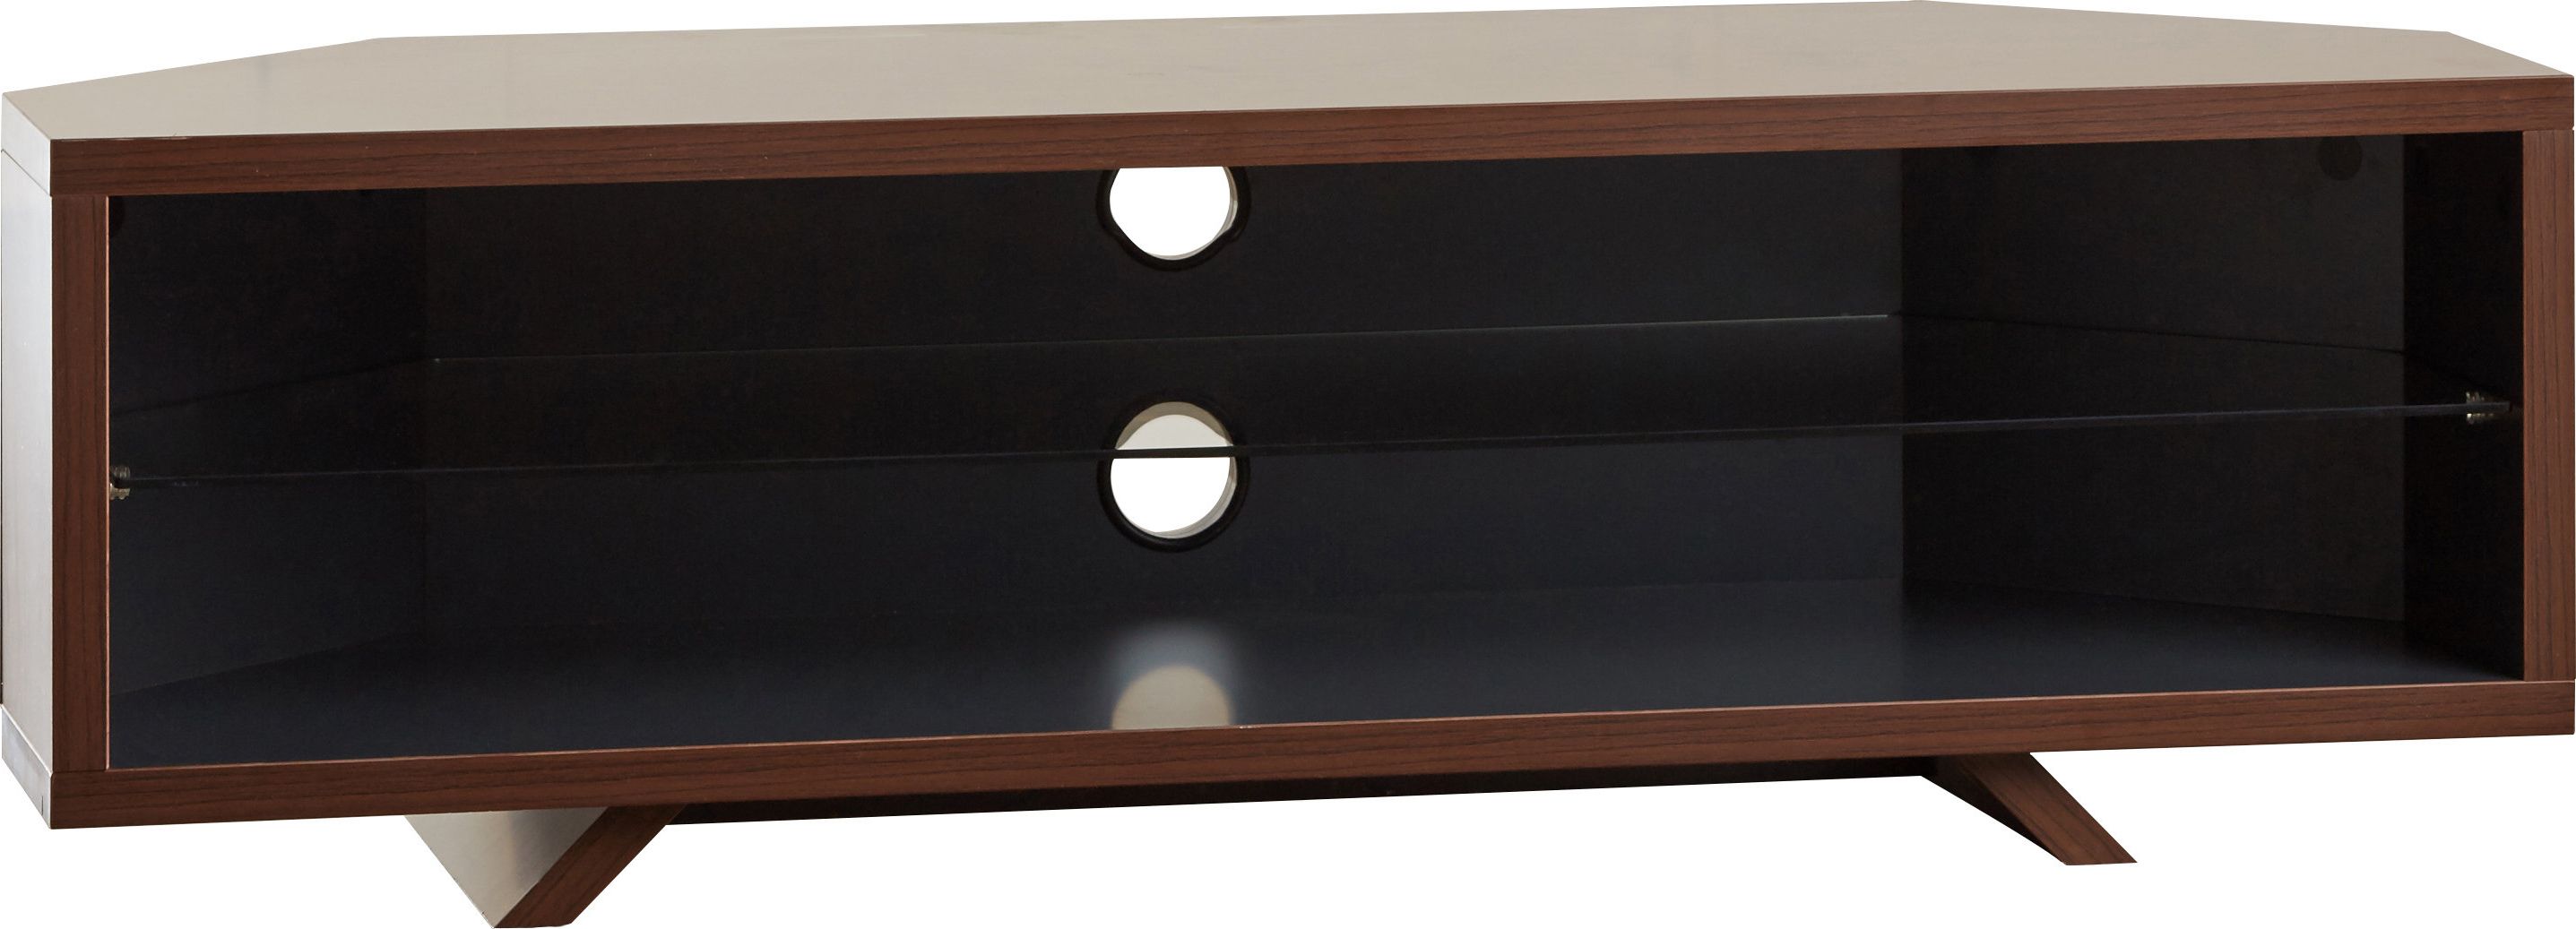 Recent Techlink Tv Stands & Entertainment Units You'll Love (View 10 of 20)